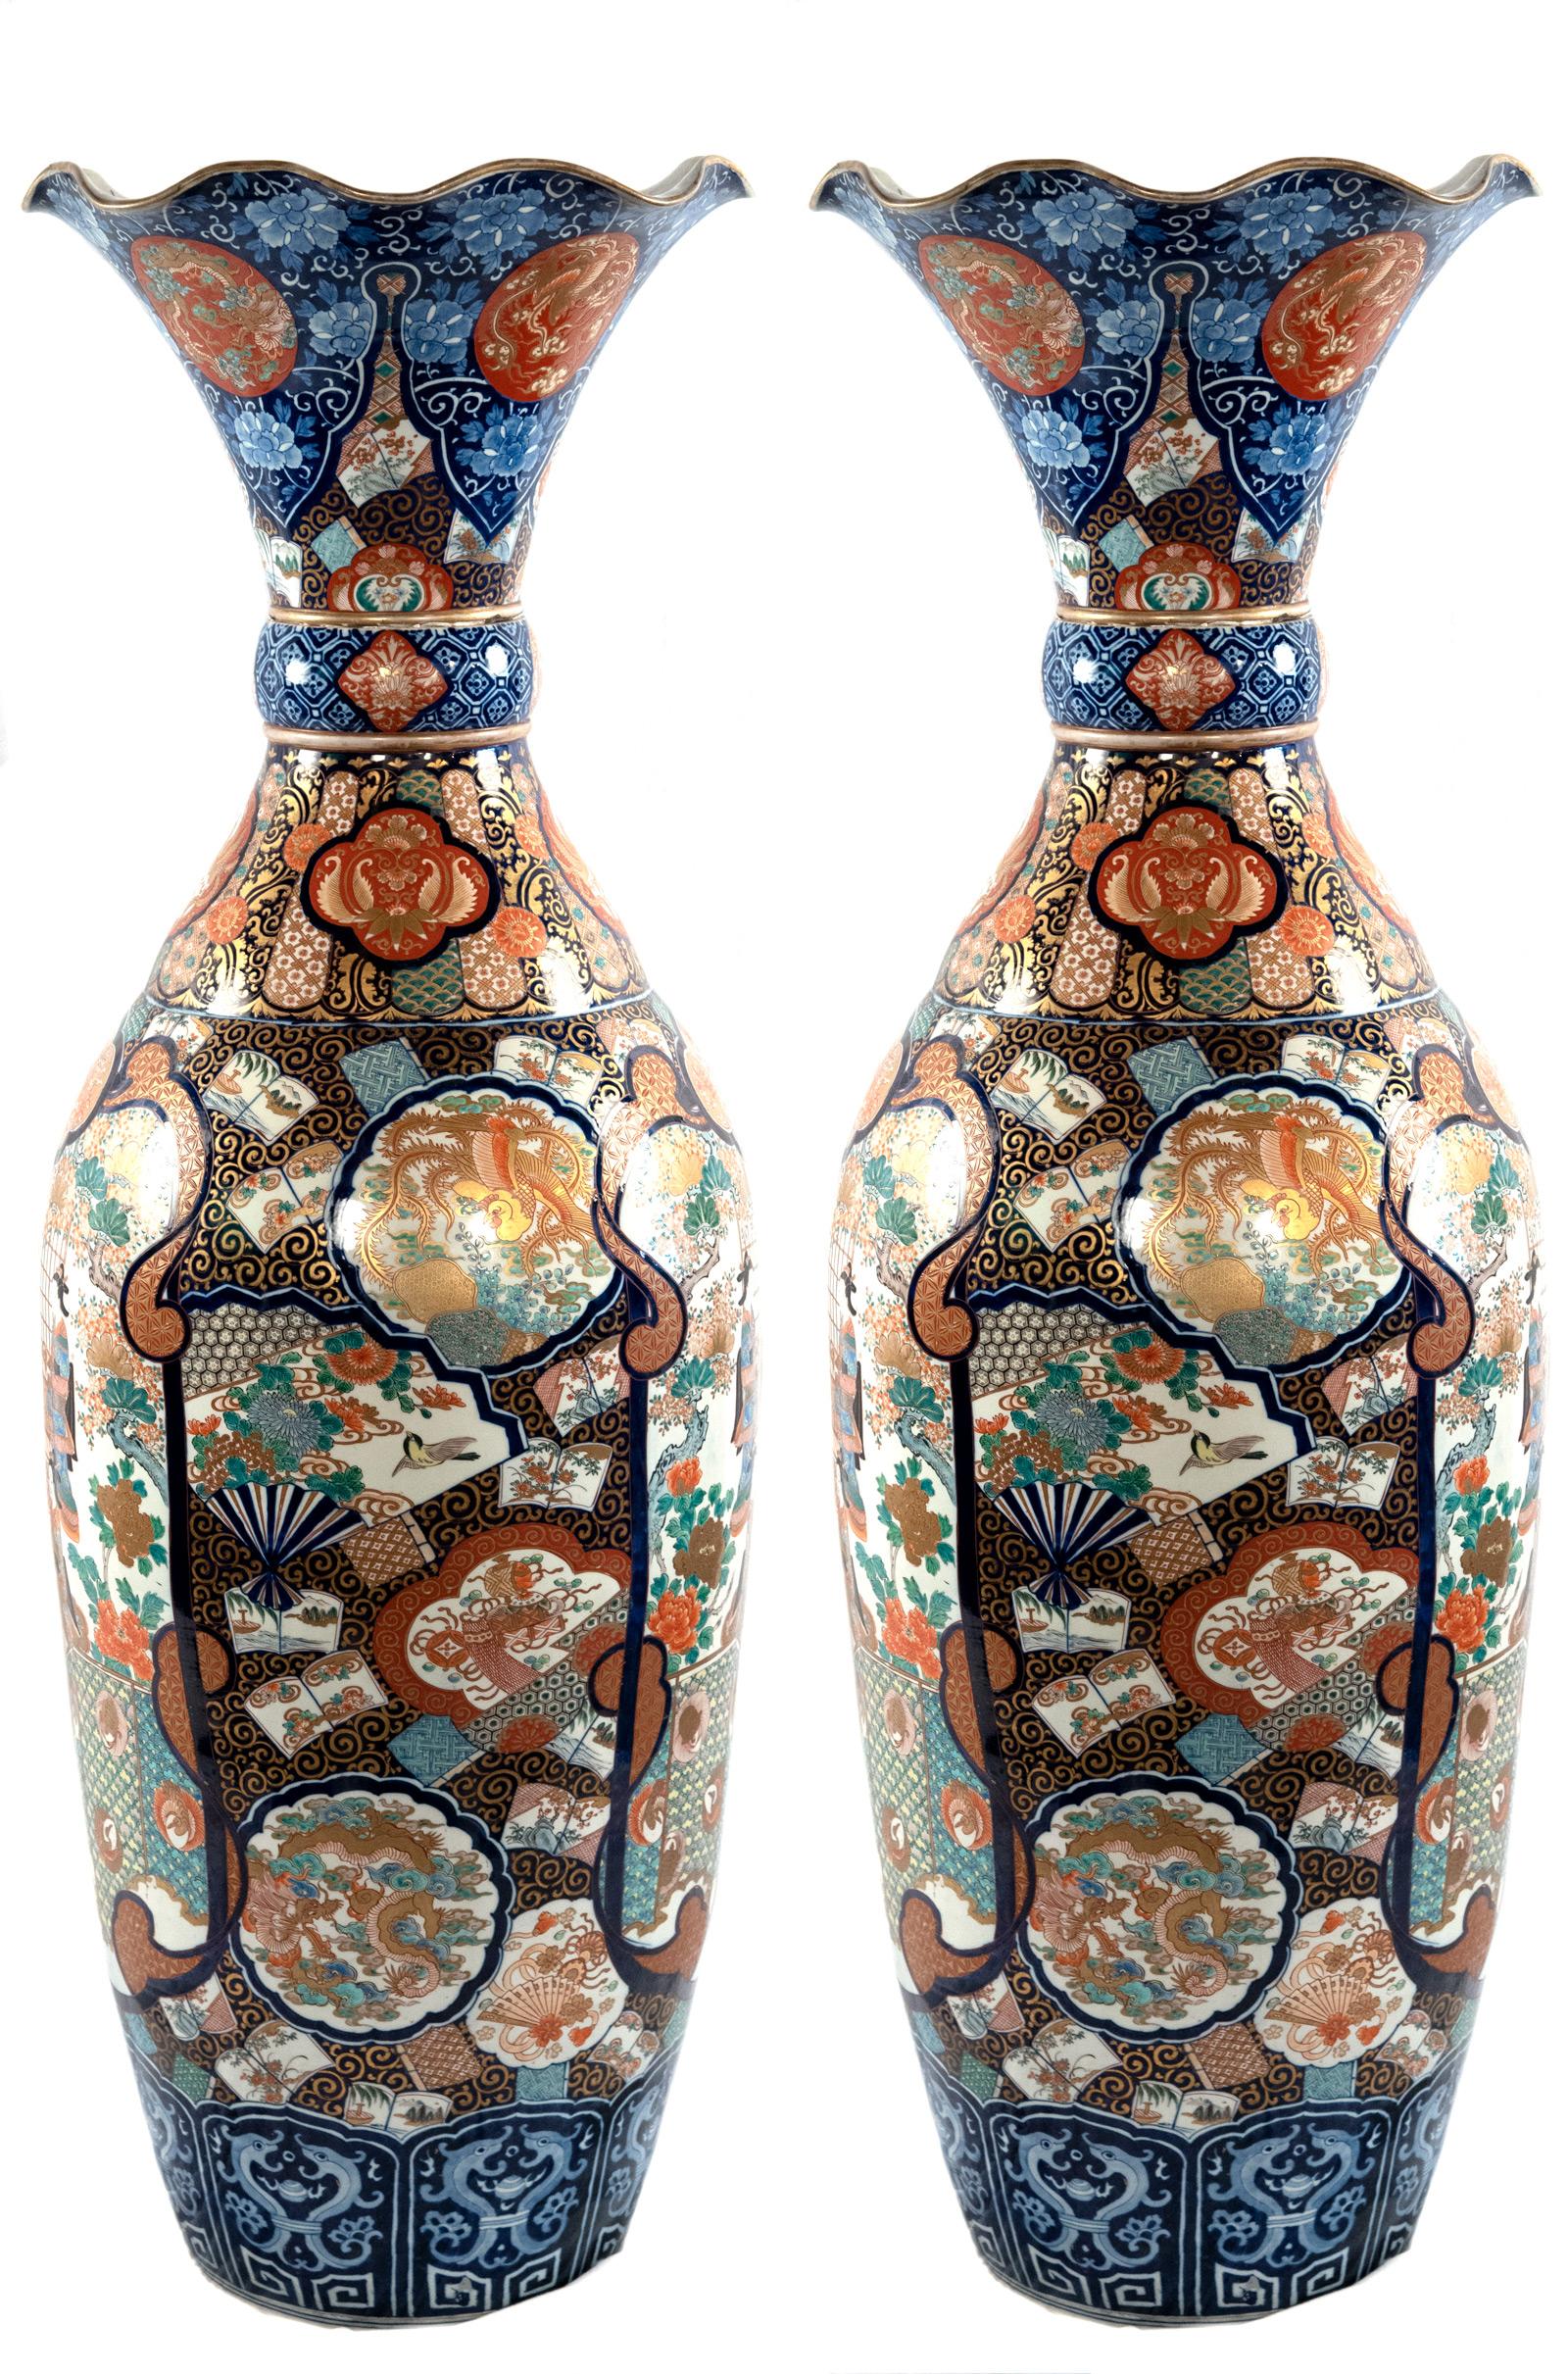 Two very fine and large Imari-style (i.e. cobalt blue, manganese red brown, copper sulfate green, and gold) porcelain vases and featuring scenes from courtly life.